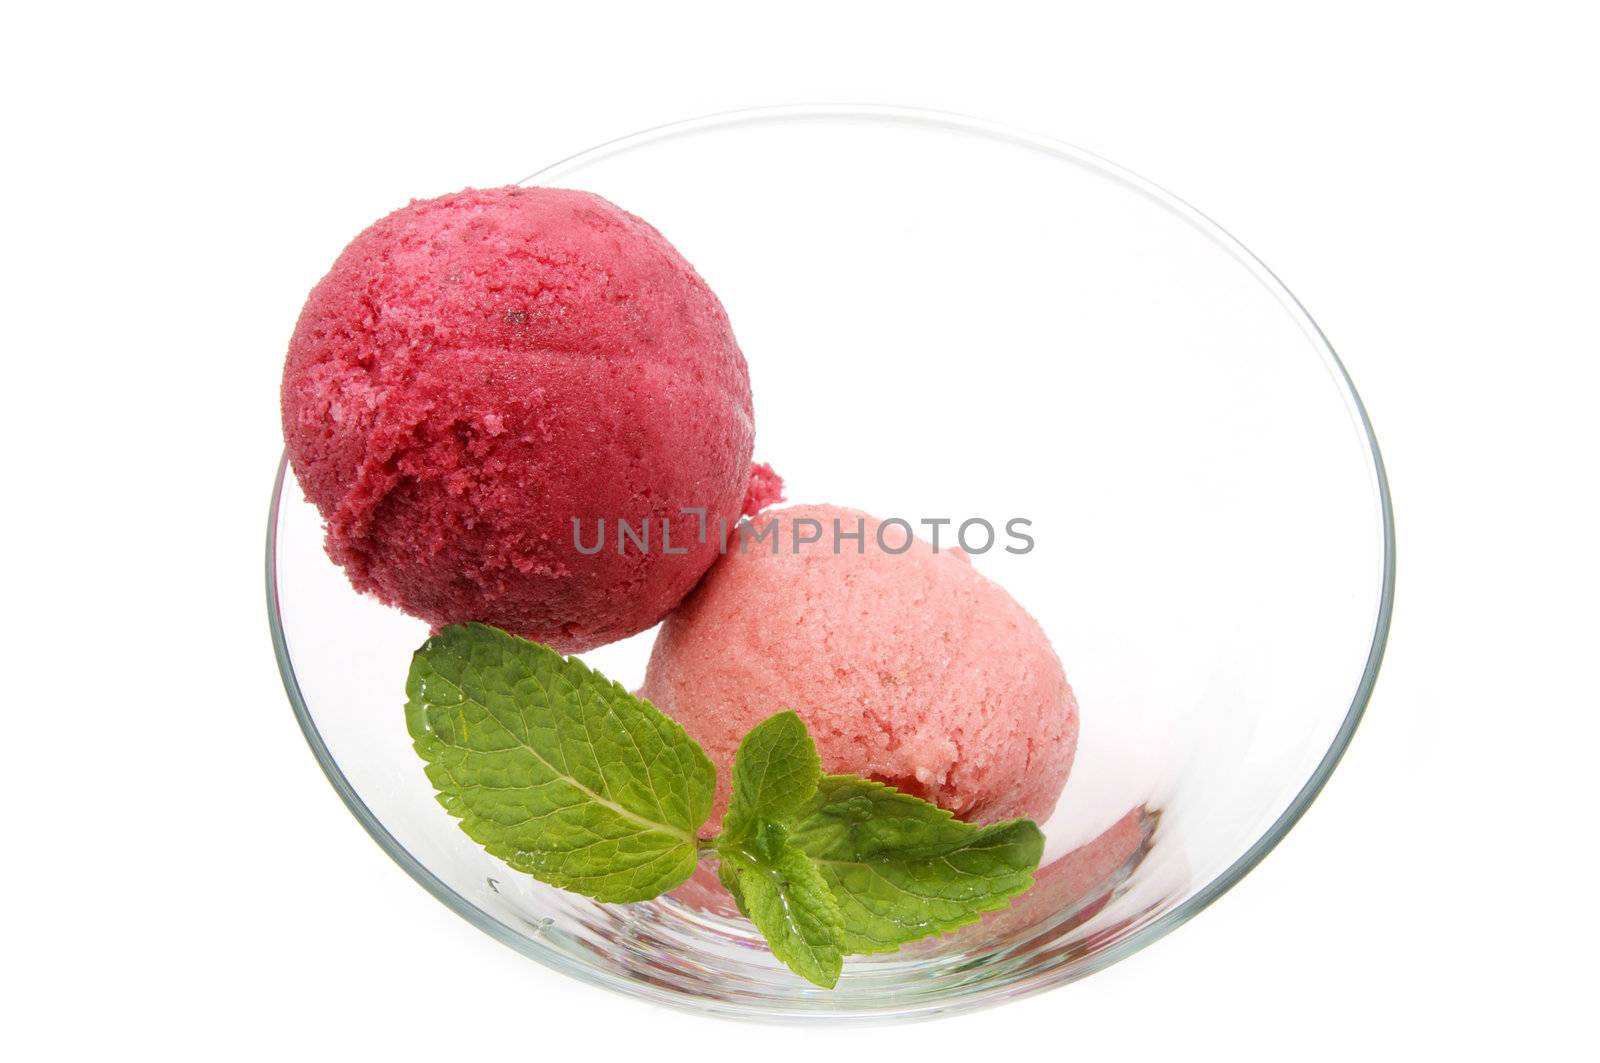 popsicles in a glass beaker on a white background